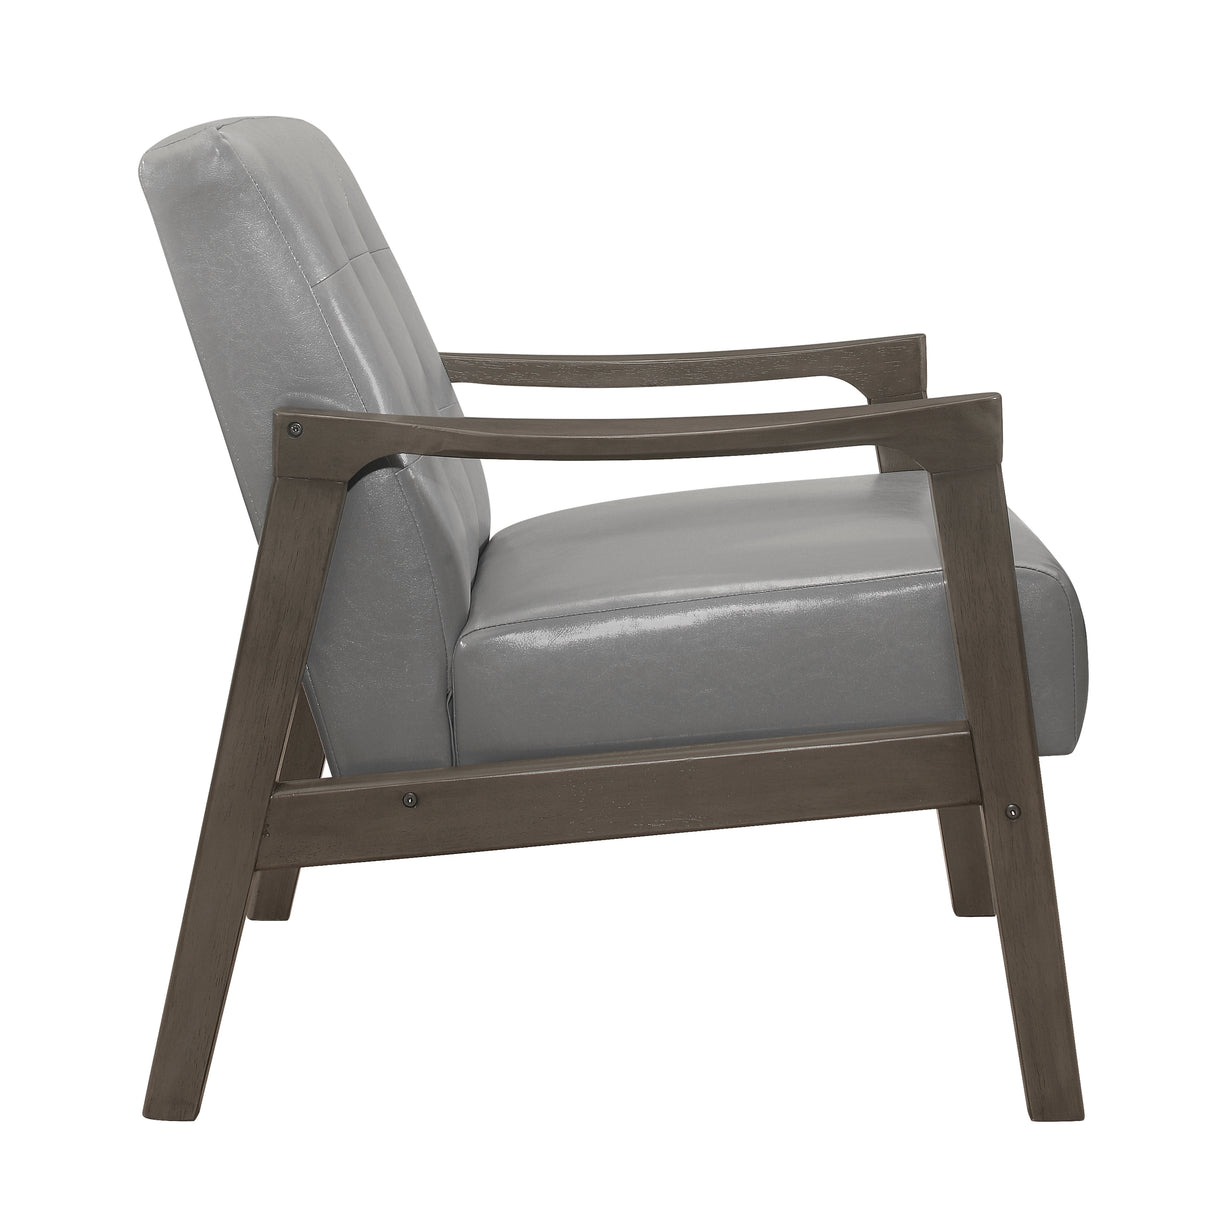 Alby Gray Accent Chair